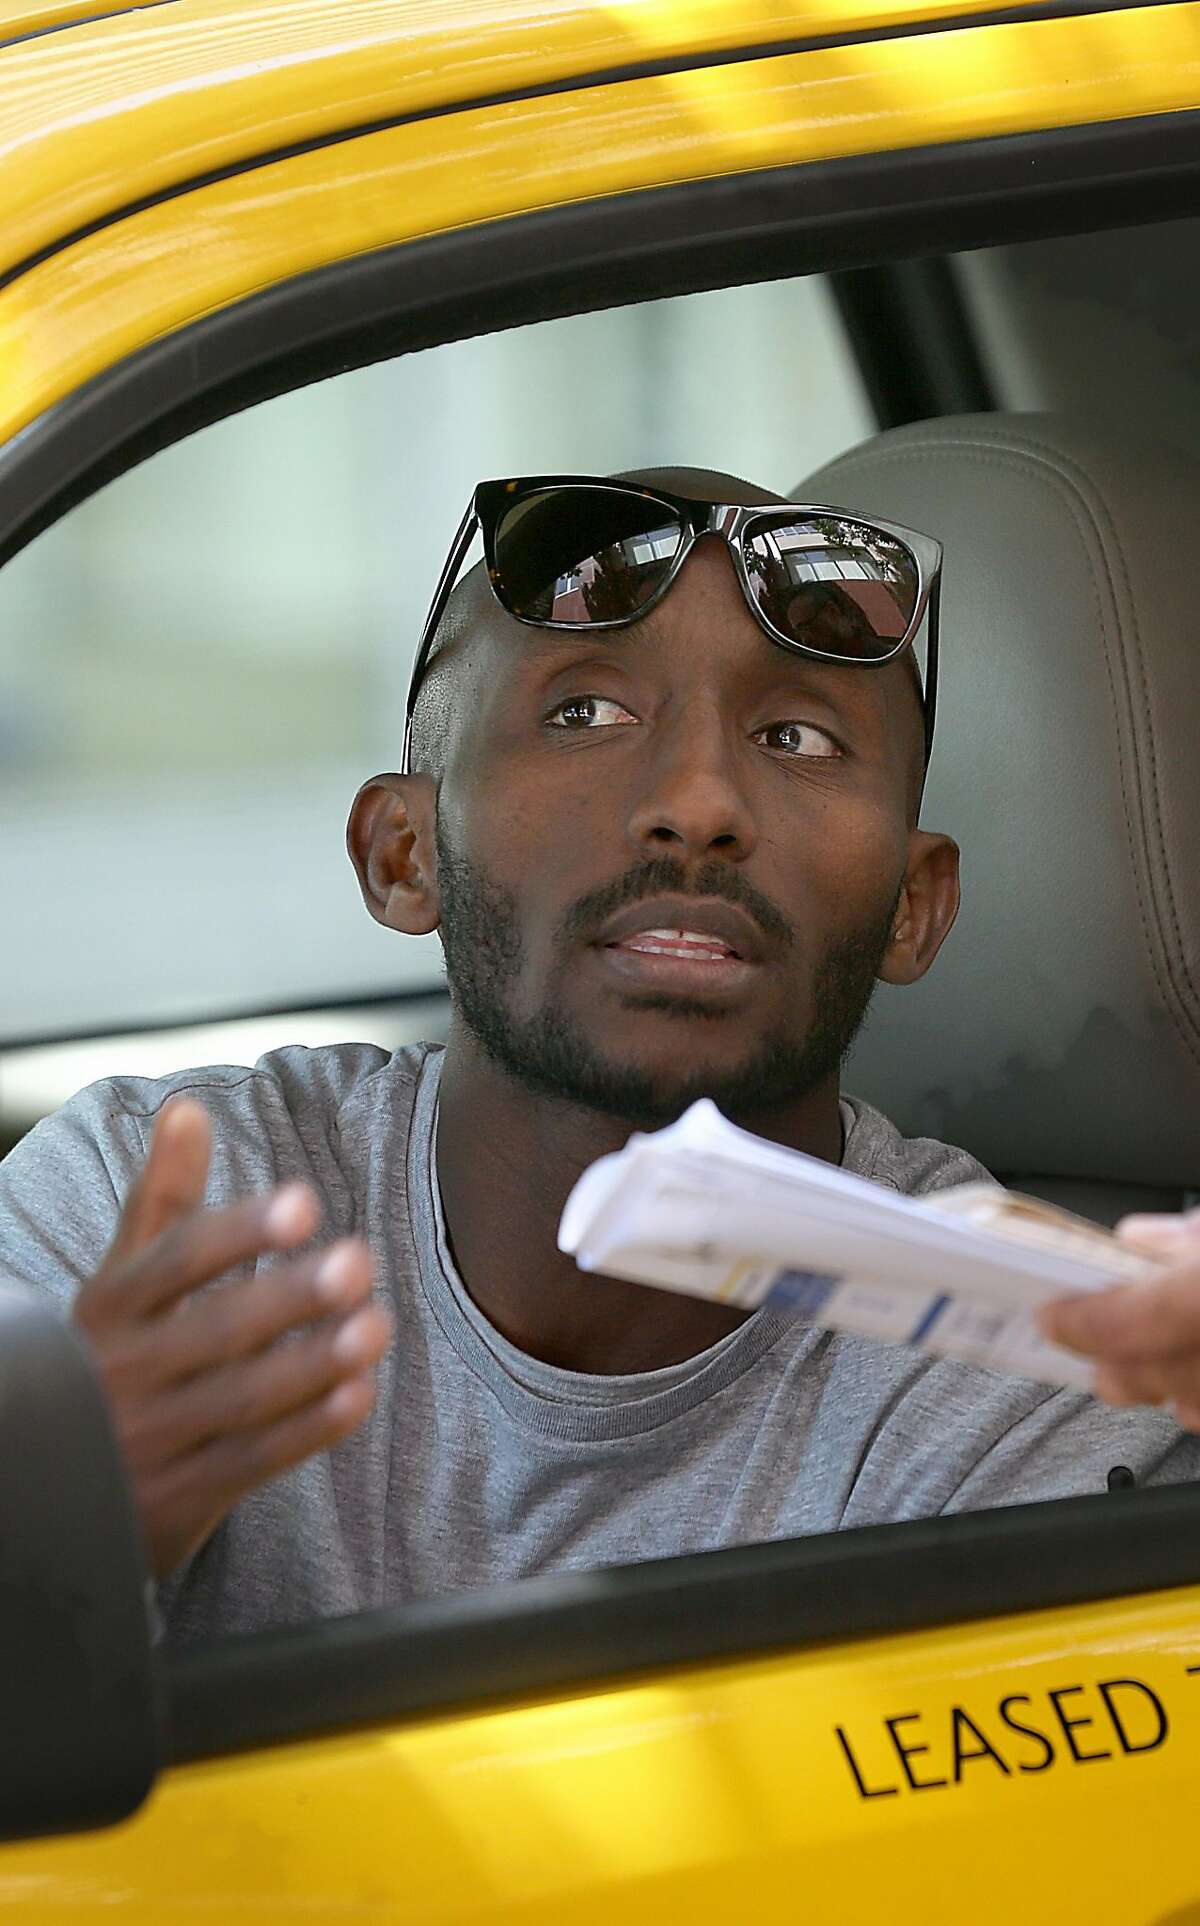 Taxi driver Daniel Habtu, 34 years old, waits for customers at Marriotts Hotel on Tuesday, March 22, 2016, in Oakland, California.